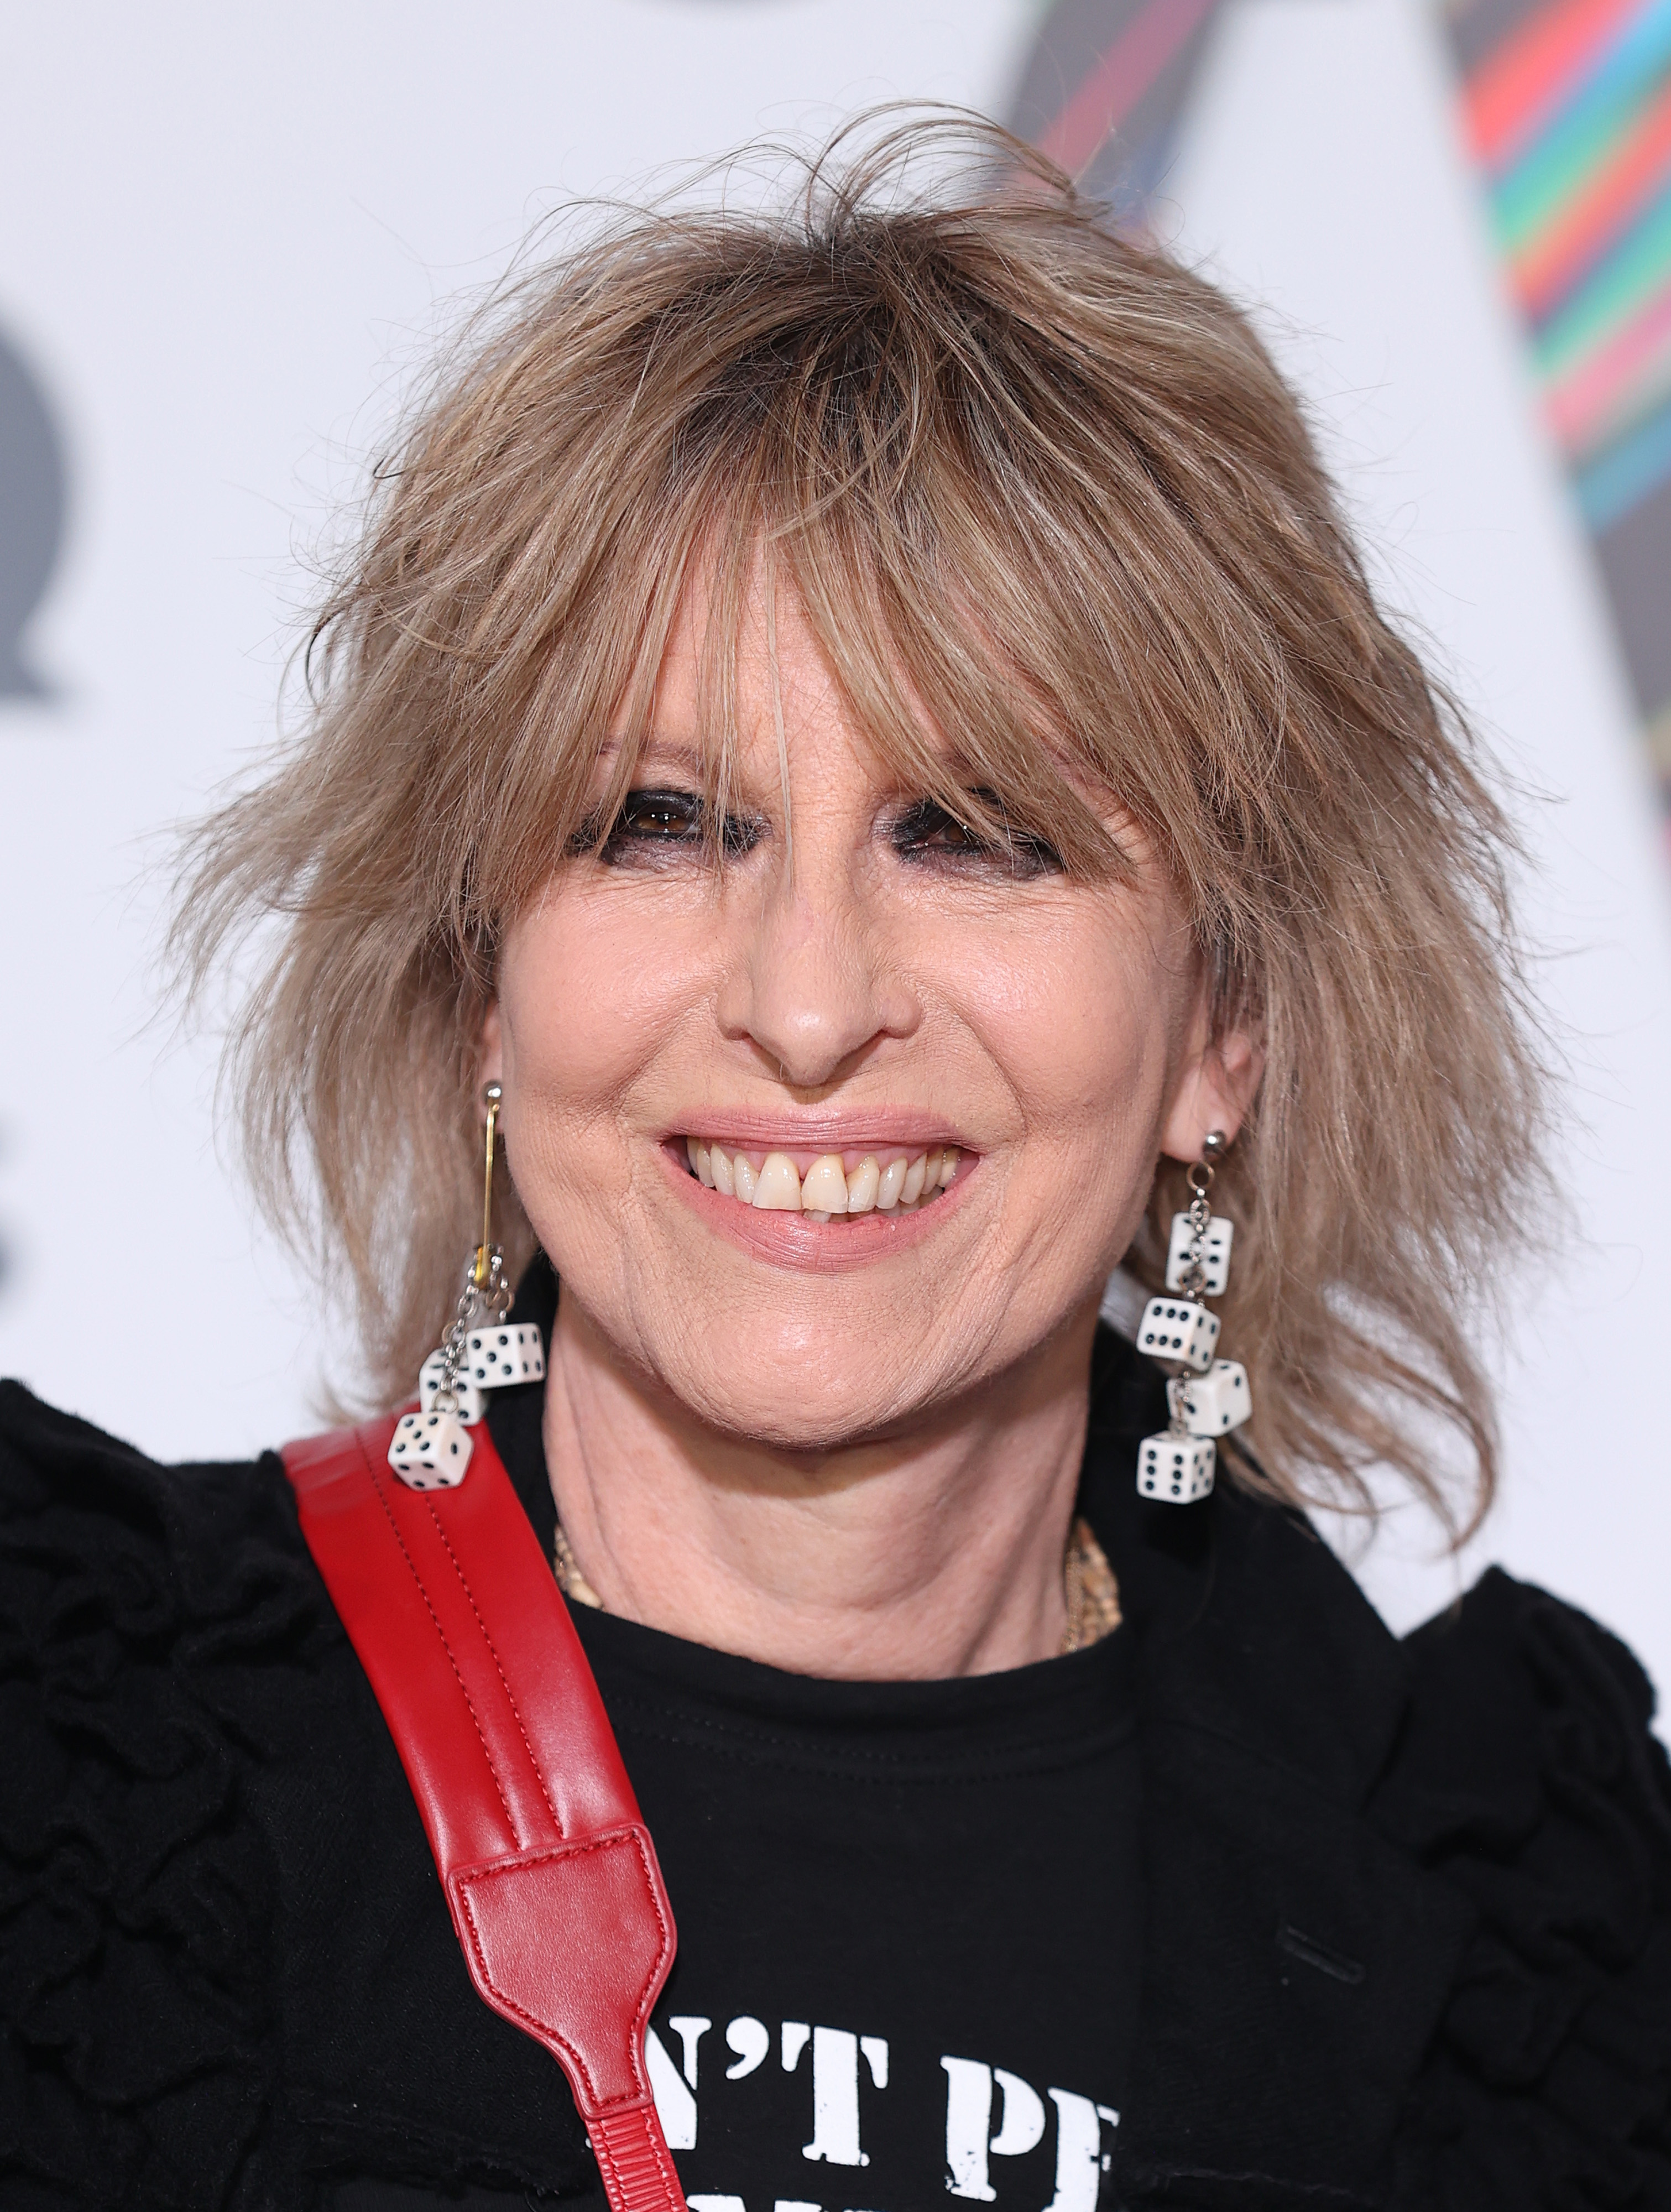 Chrissie Hynde attends the GQ Men Of The Year Awards 2021 at Tate Modern on September 1, 2021 in London, England. | Source: Getty Images